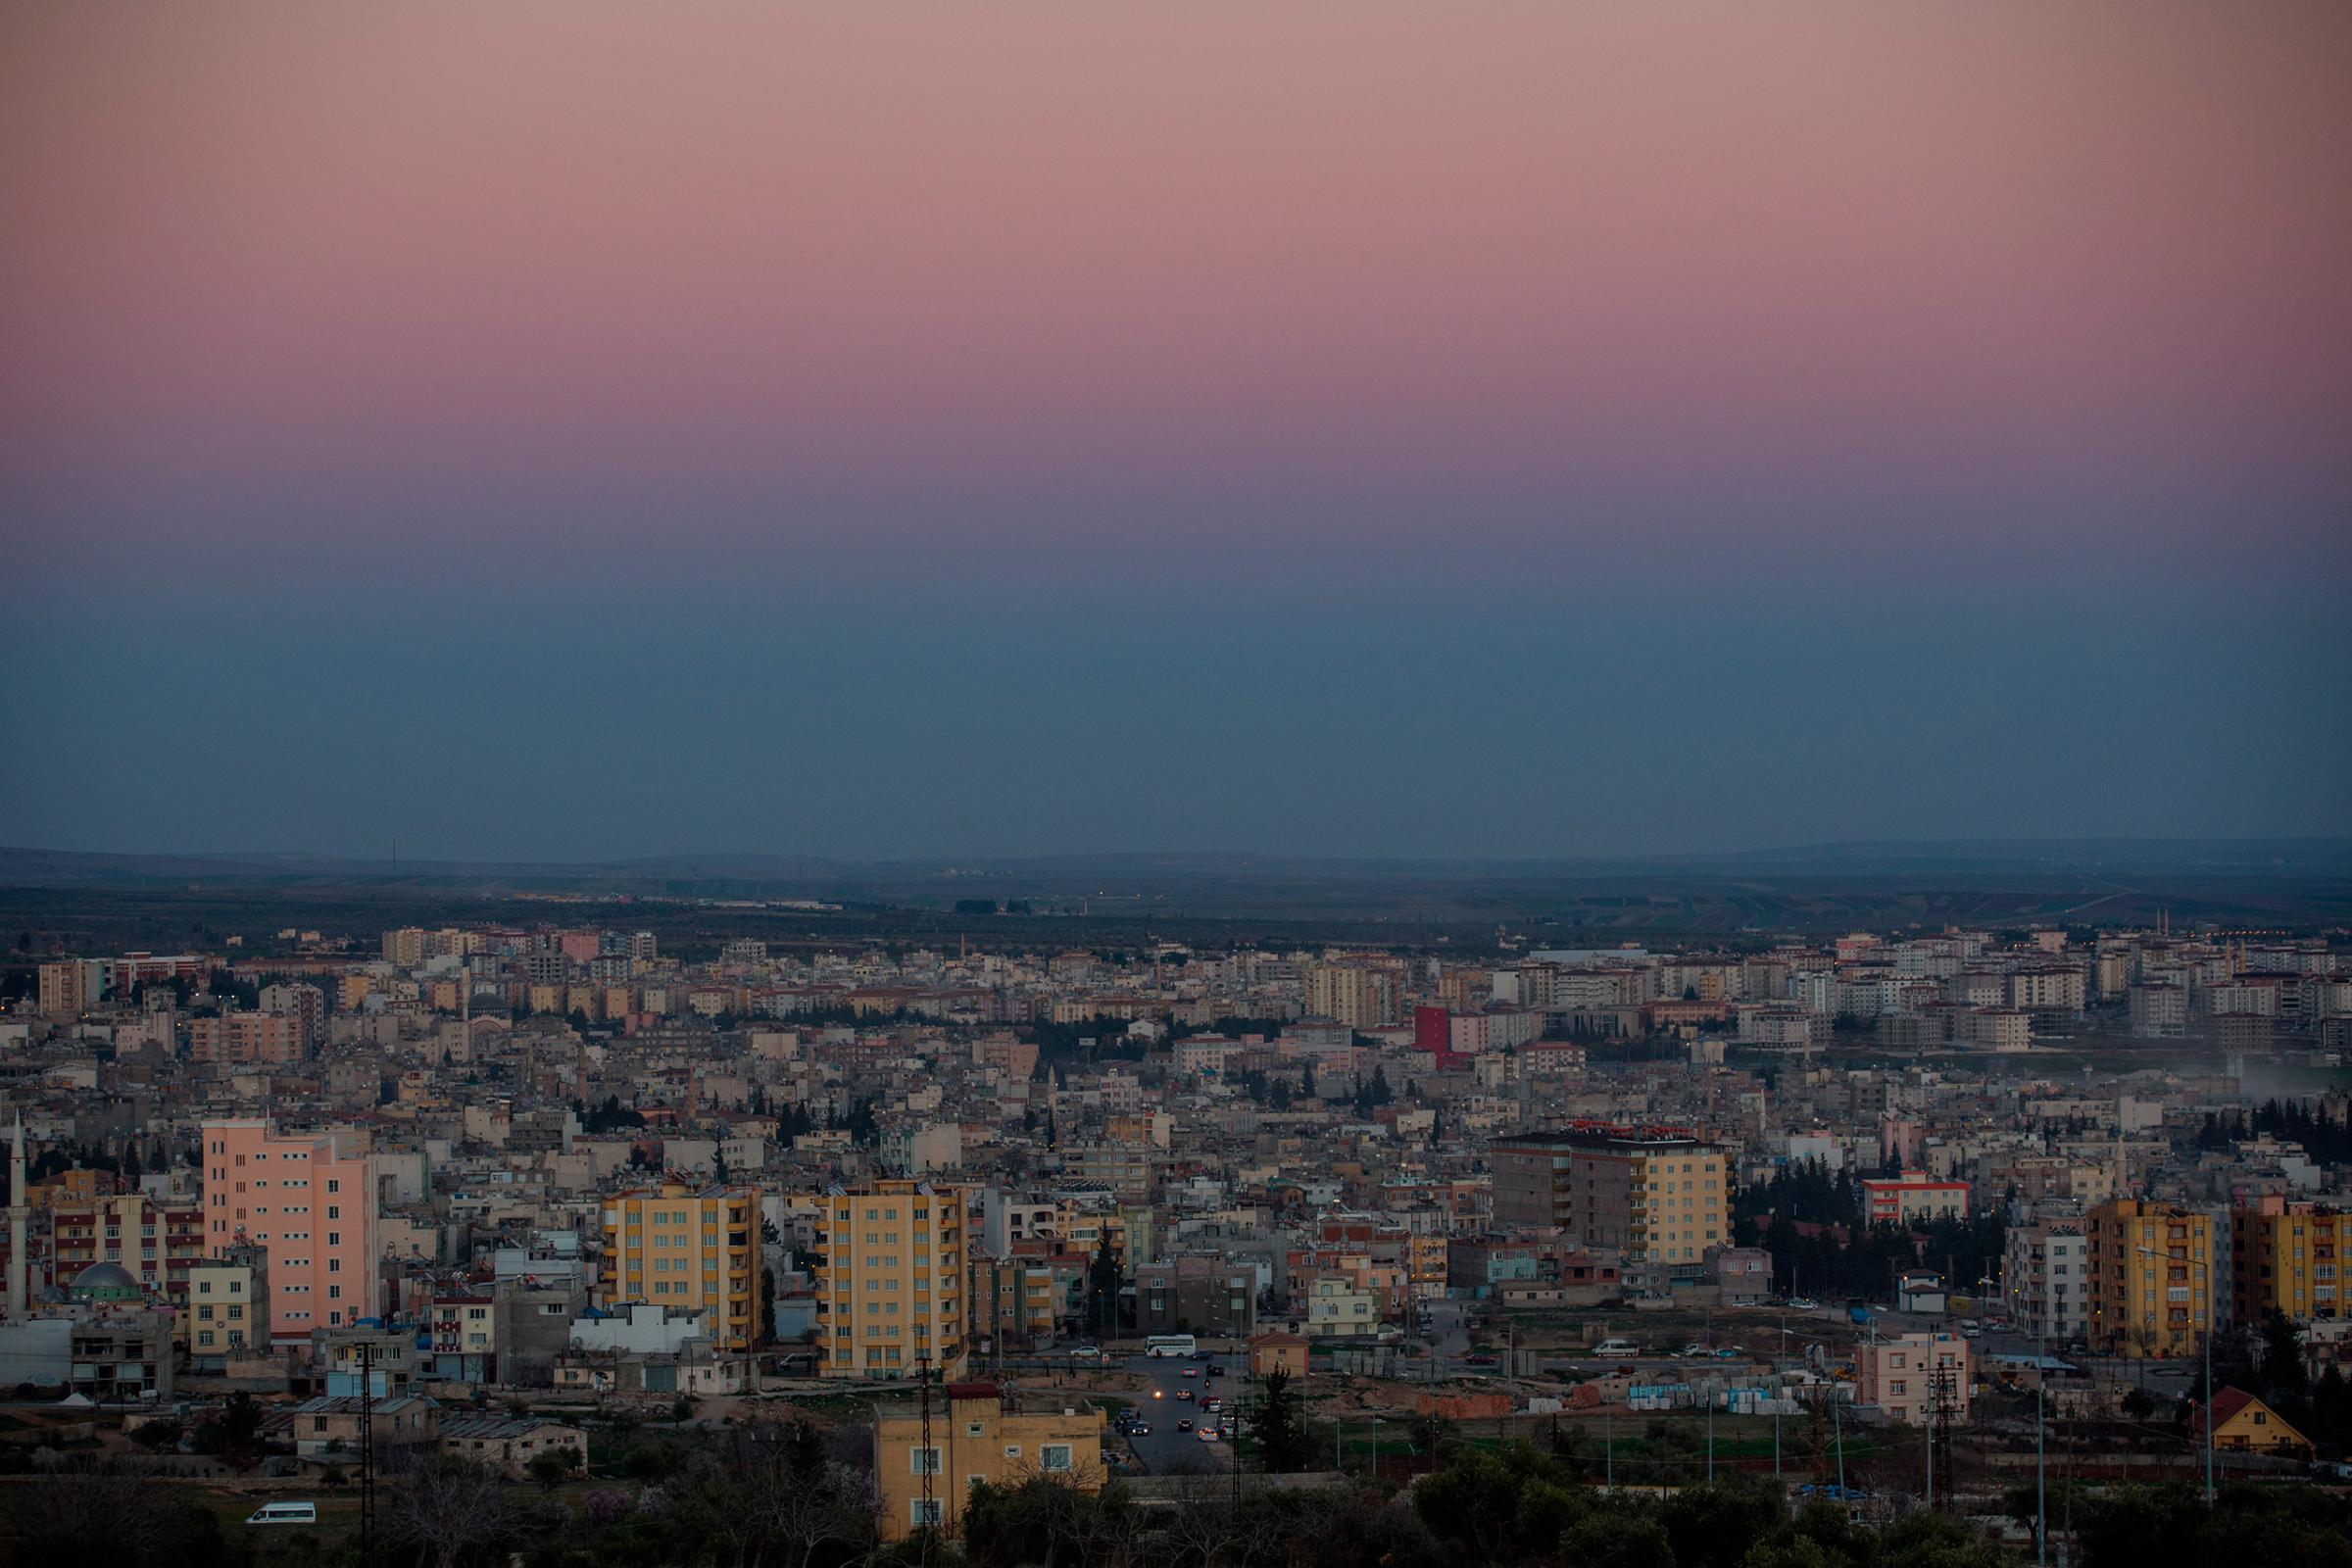 The sun sets on the city of Kilis, which lies along Turkey's southern border with Syria and includes the Oncupinar Crossing, March 1, 2016.